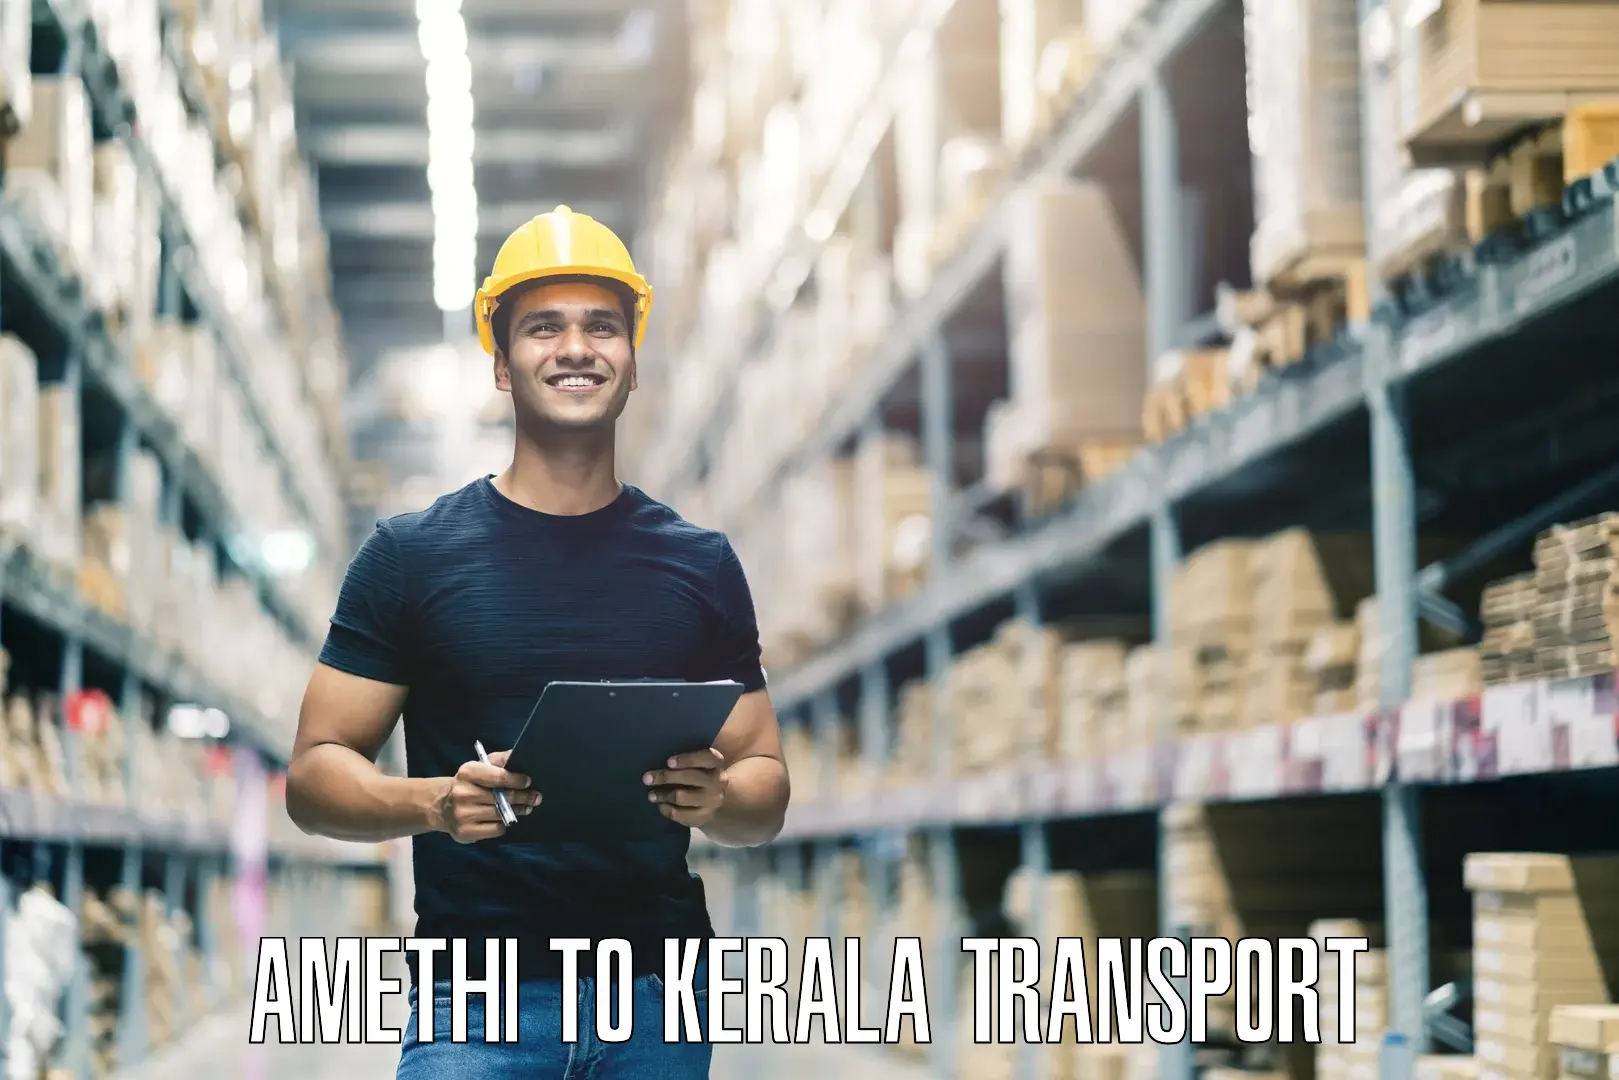 Nearby transport service Amethi to Kannur